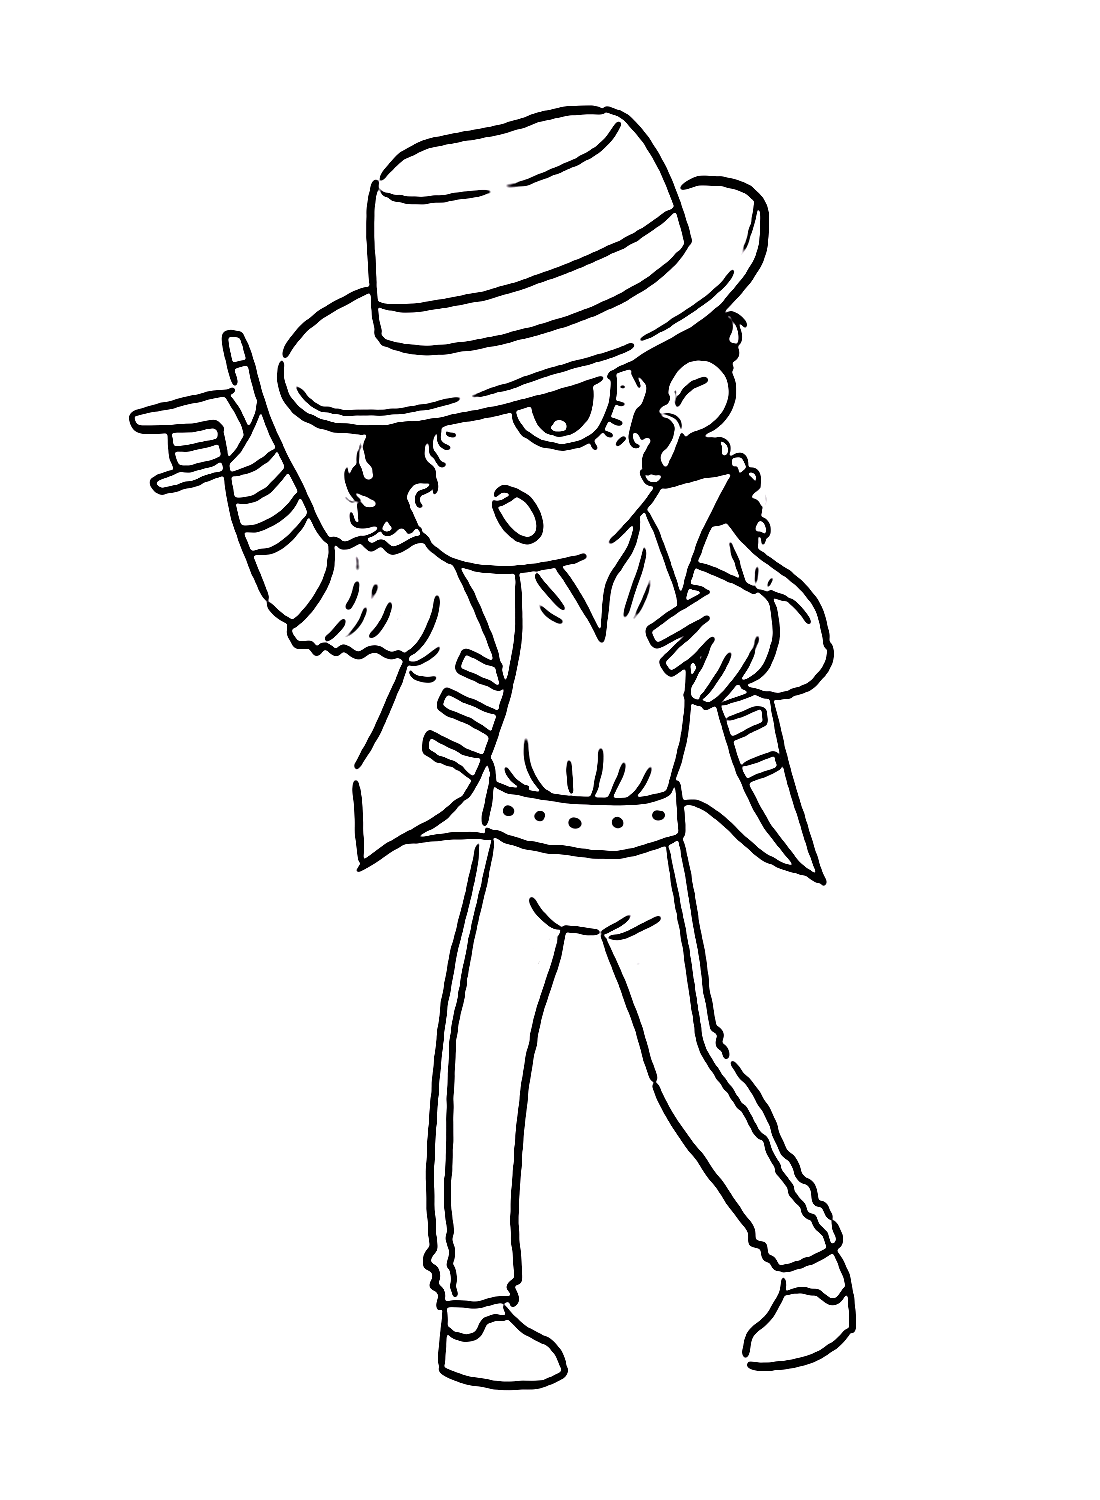 Michael Jackson Coloring Pages Printable for Free Download